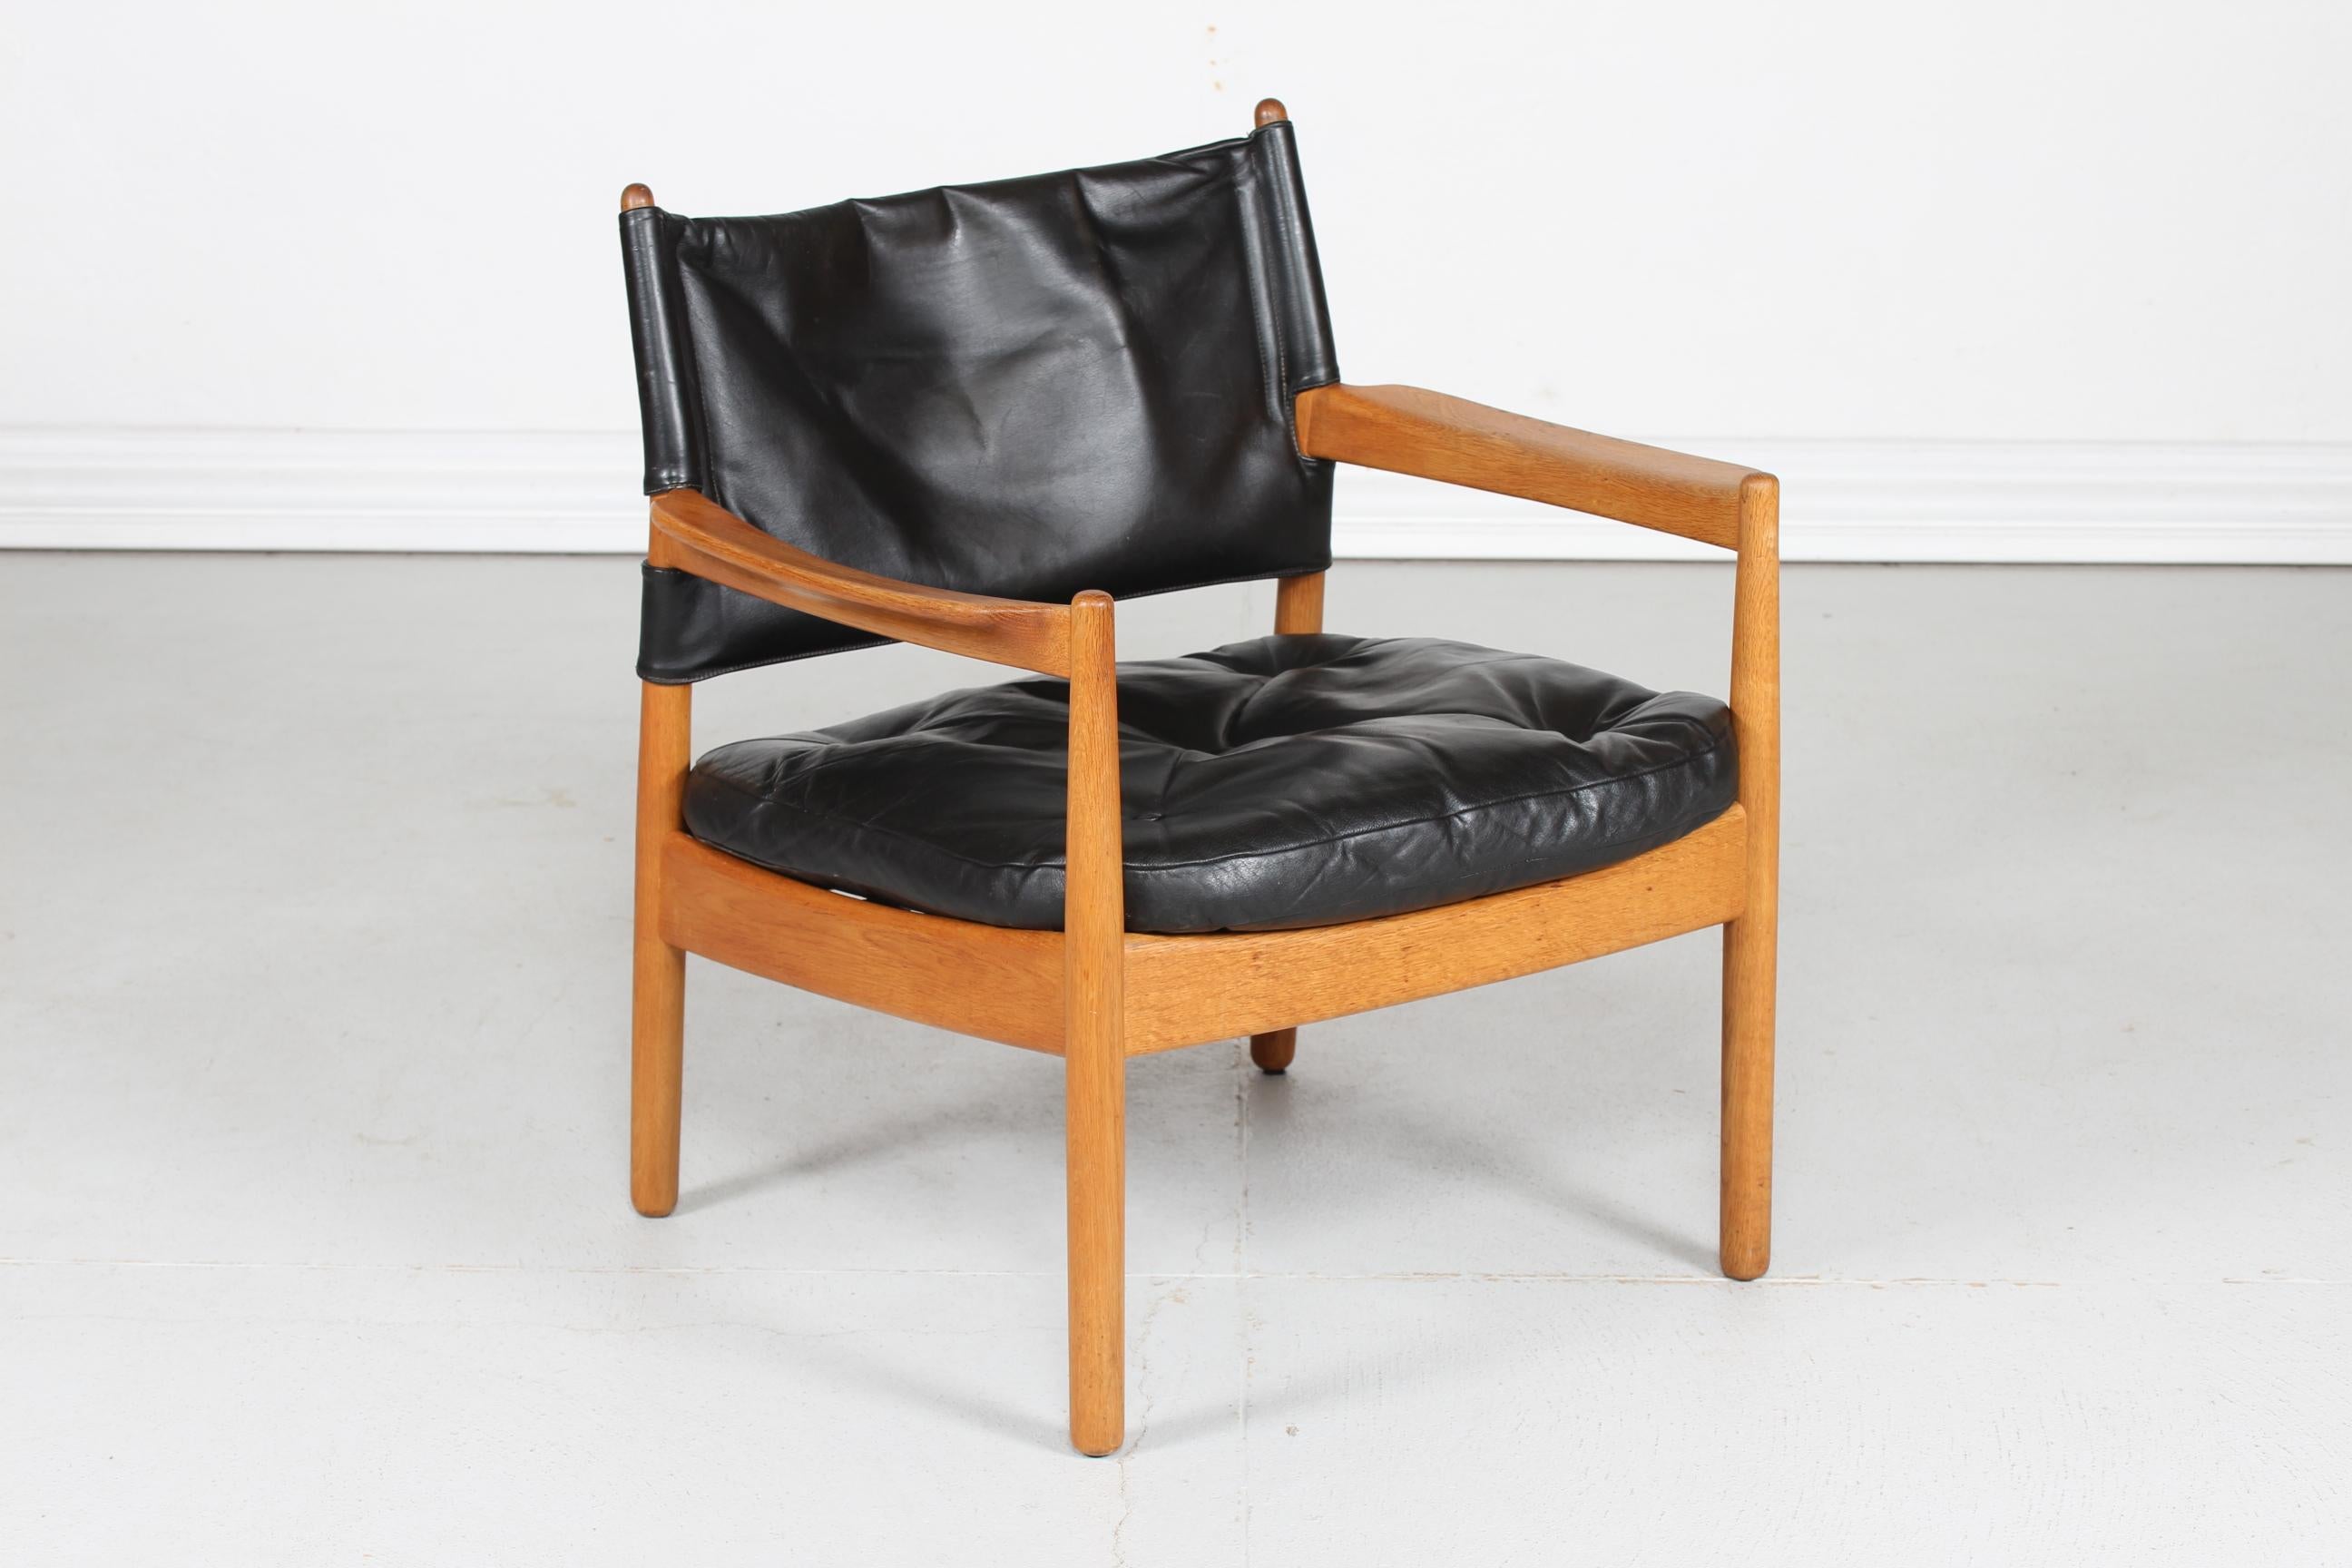 Easy chair by the Swedish furniture designer and architect Gunnar Myrstrand (1925-1997) manufactured by Källemo Sweden.

This chair is made of solid oak and upholstered with black leather

Nice vintage condition with good patina after normal